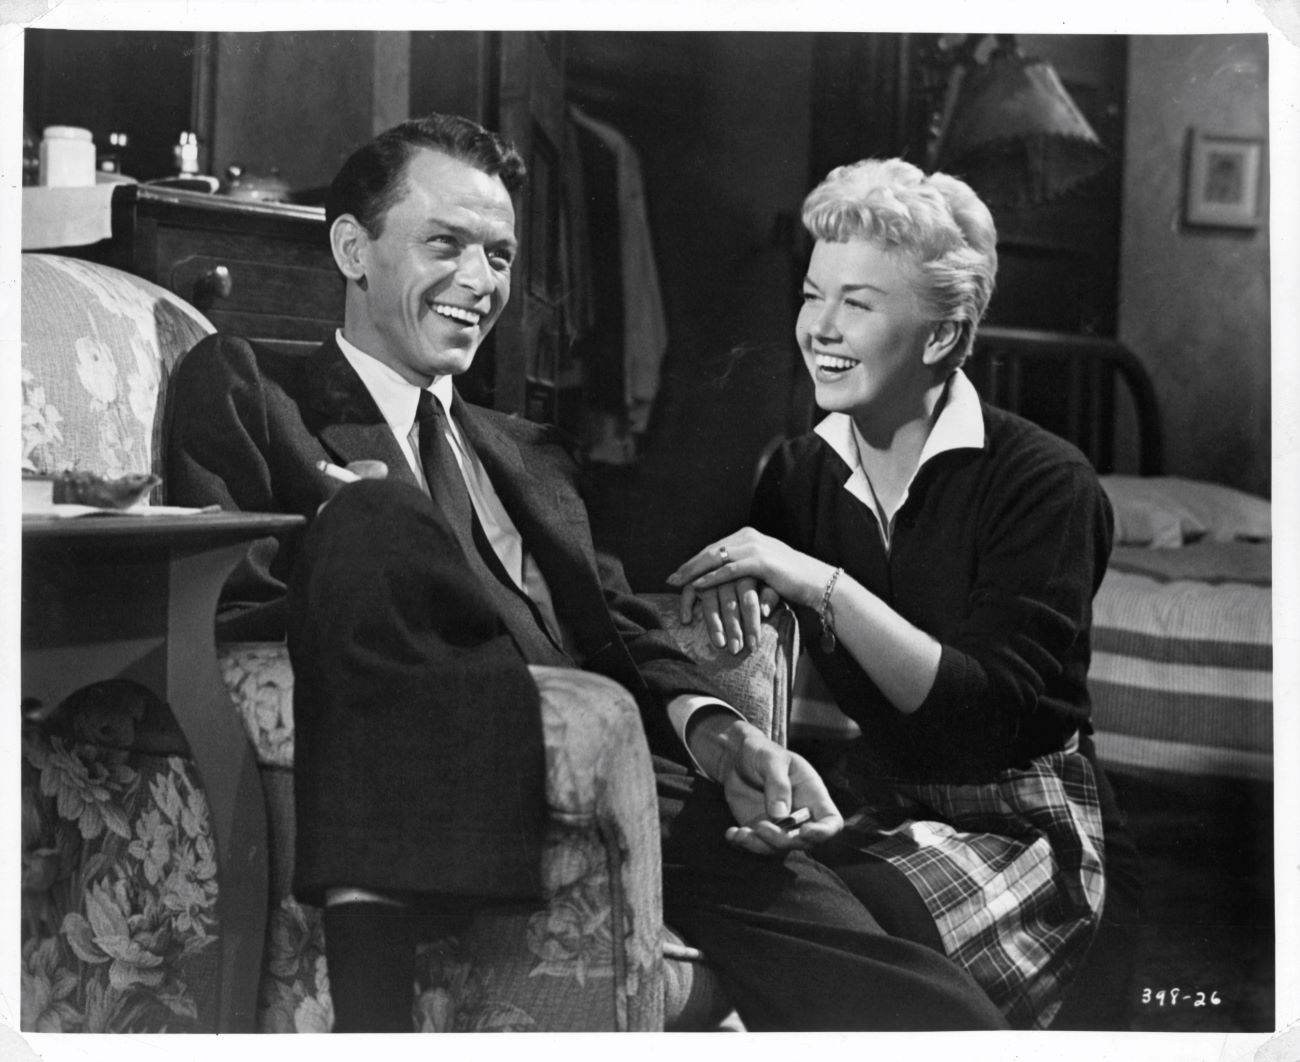 A black and white picture of Frank Sinatra sitting in an arm chair and Doris Day sitting next to him.